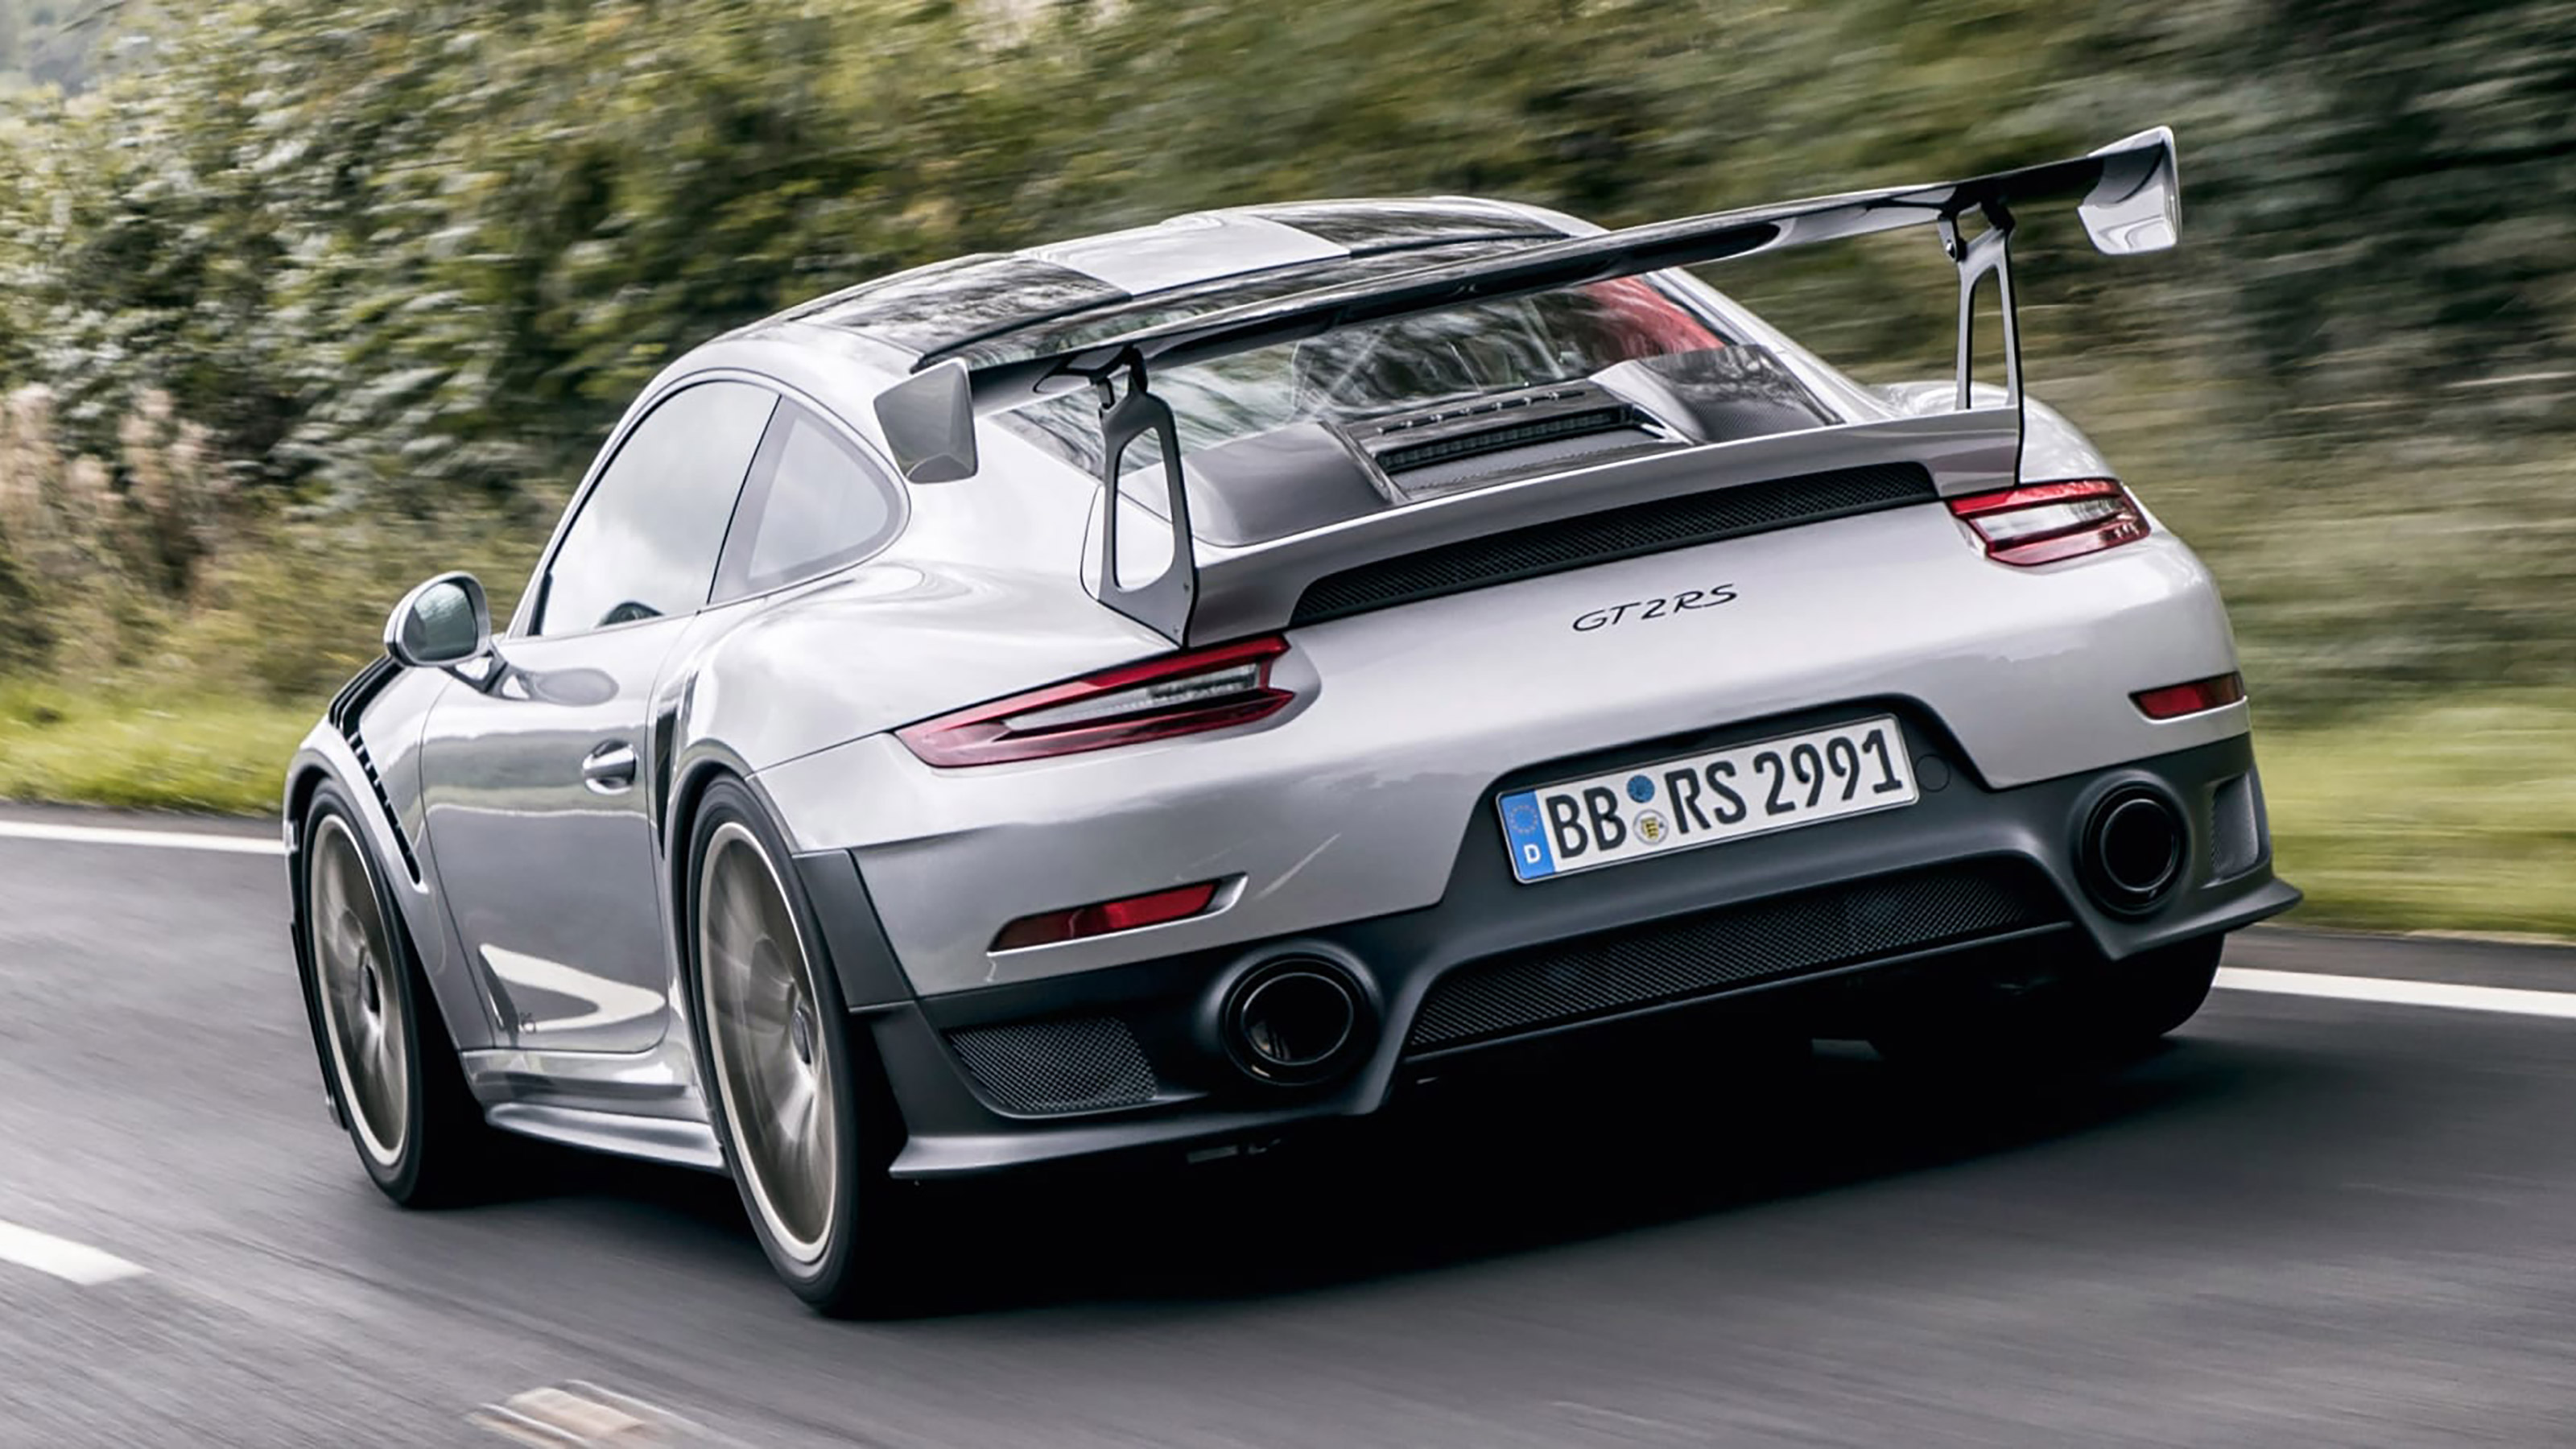  Porsche 911 GT2 RS review - monstrous performance drives 911 to a new  level | evo